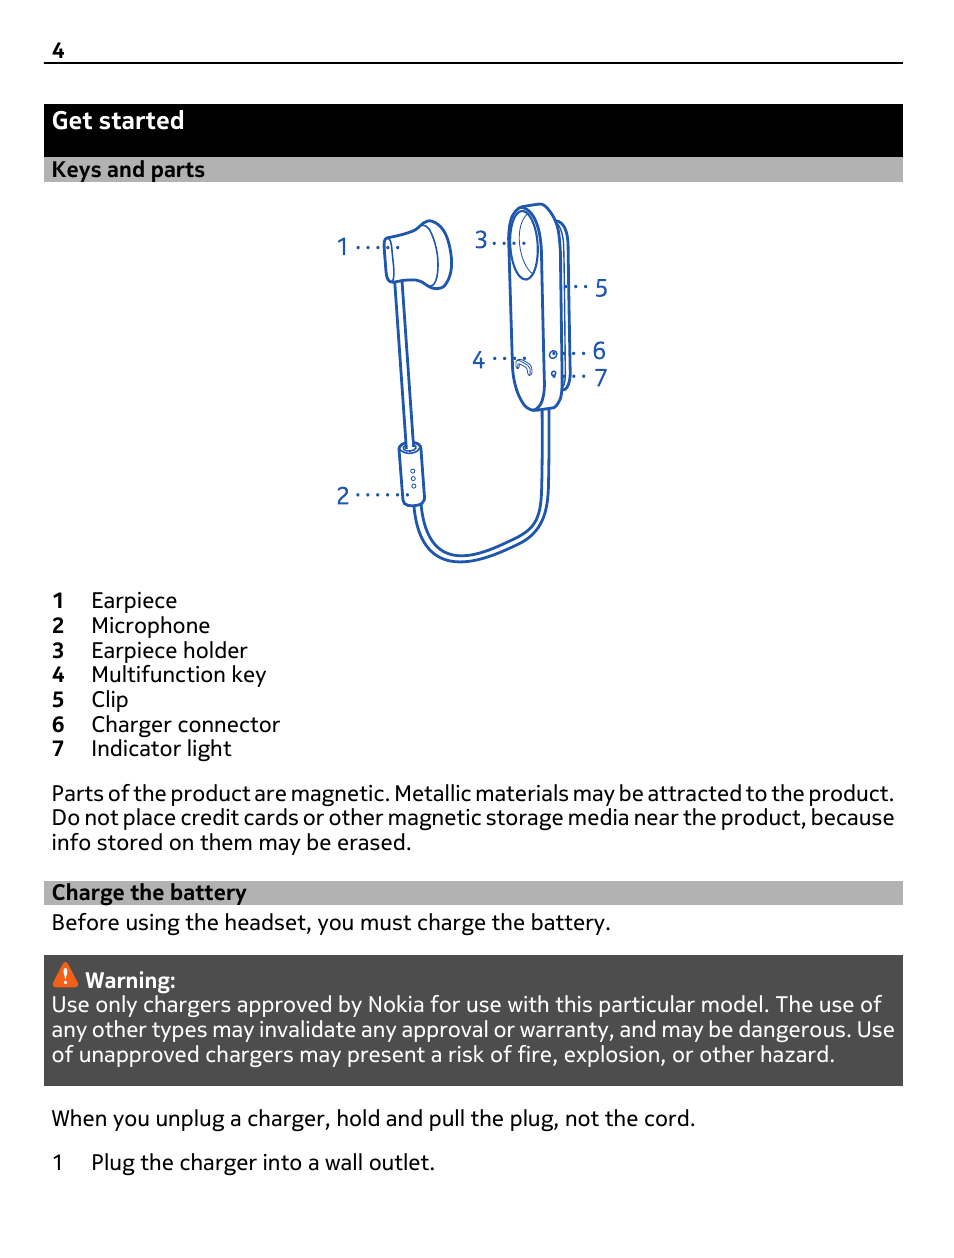 Get started, Keys and parts, Charge the battery | Nokia BH-118 User Manual  | Page 4 / 11